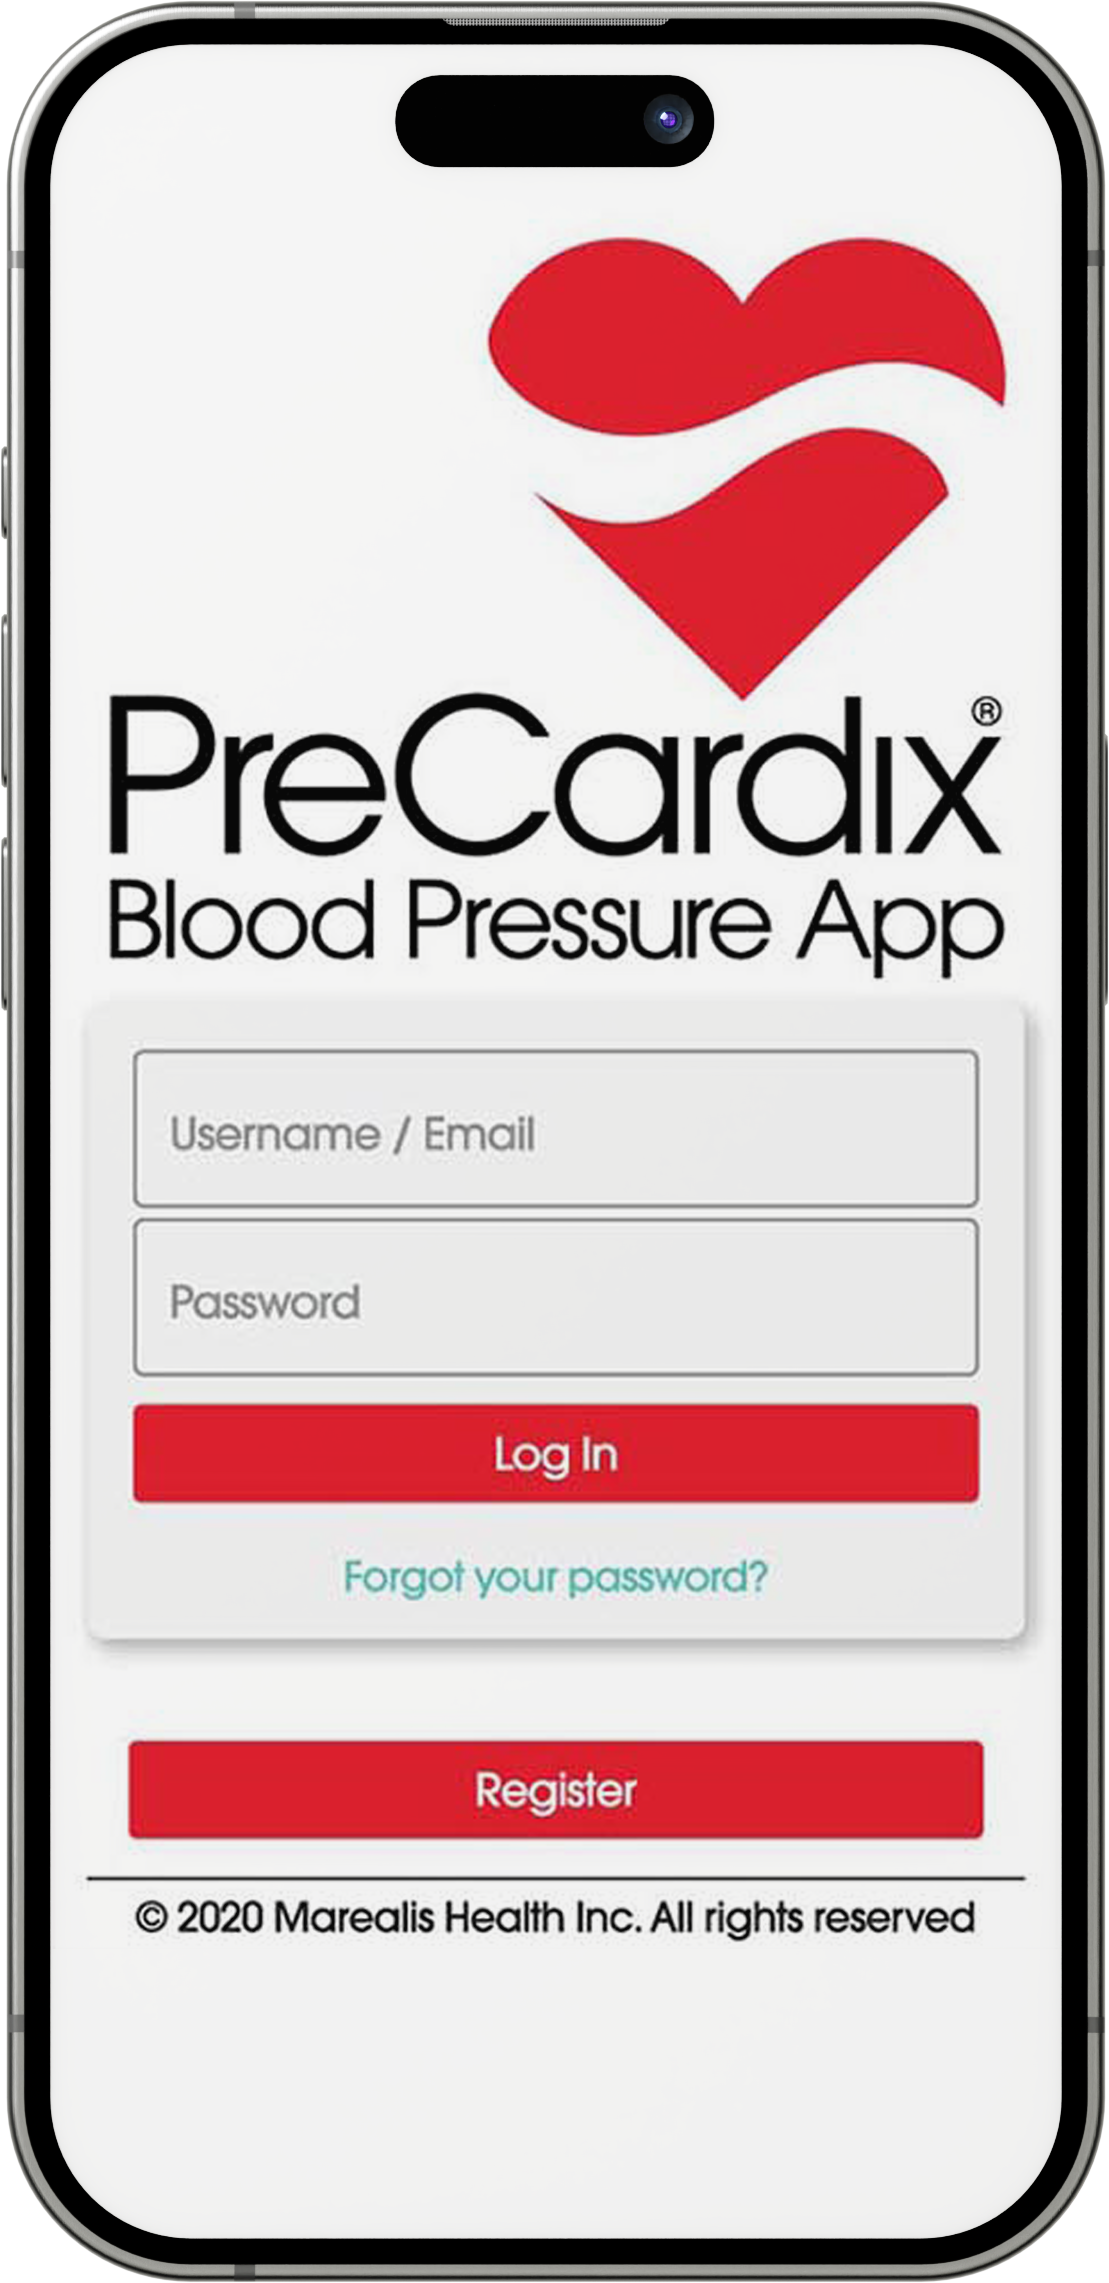 Initial user registration screen of the PreCardix app, inviting new users to sign up and embark on a path to improved cardiovascular health.